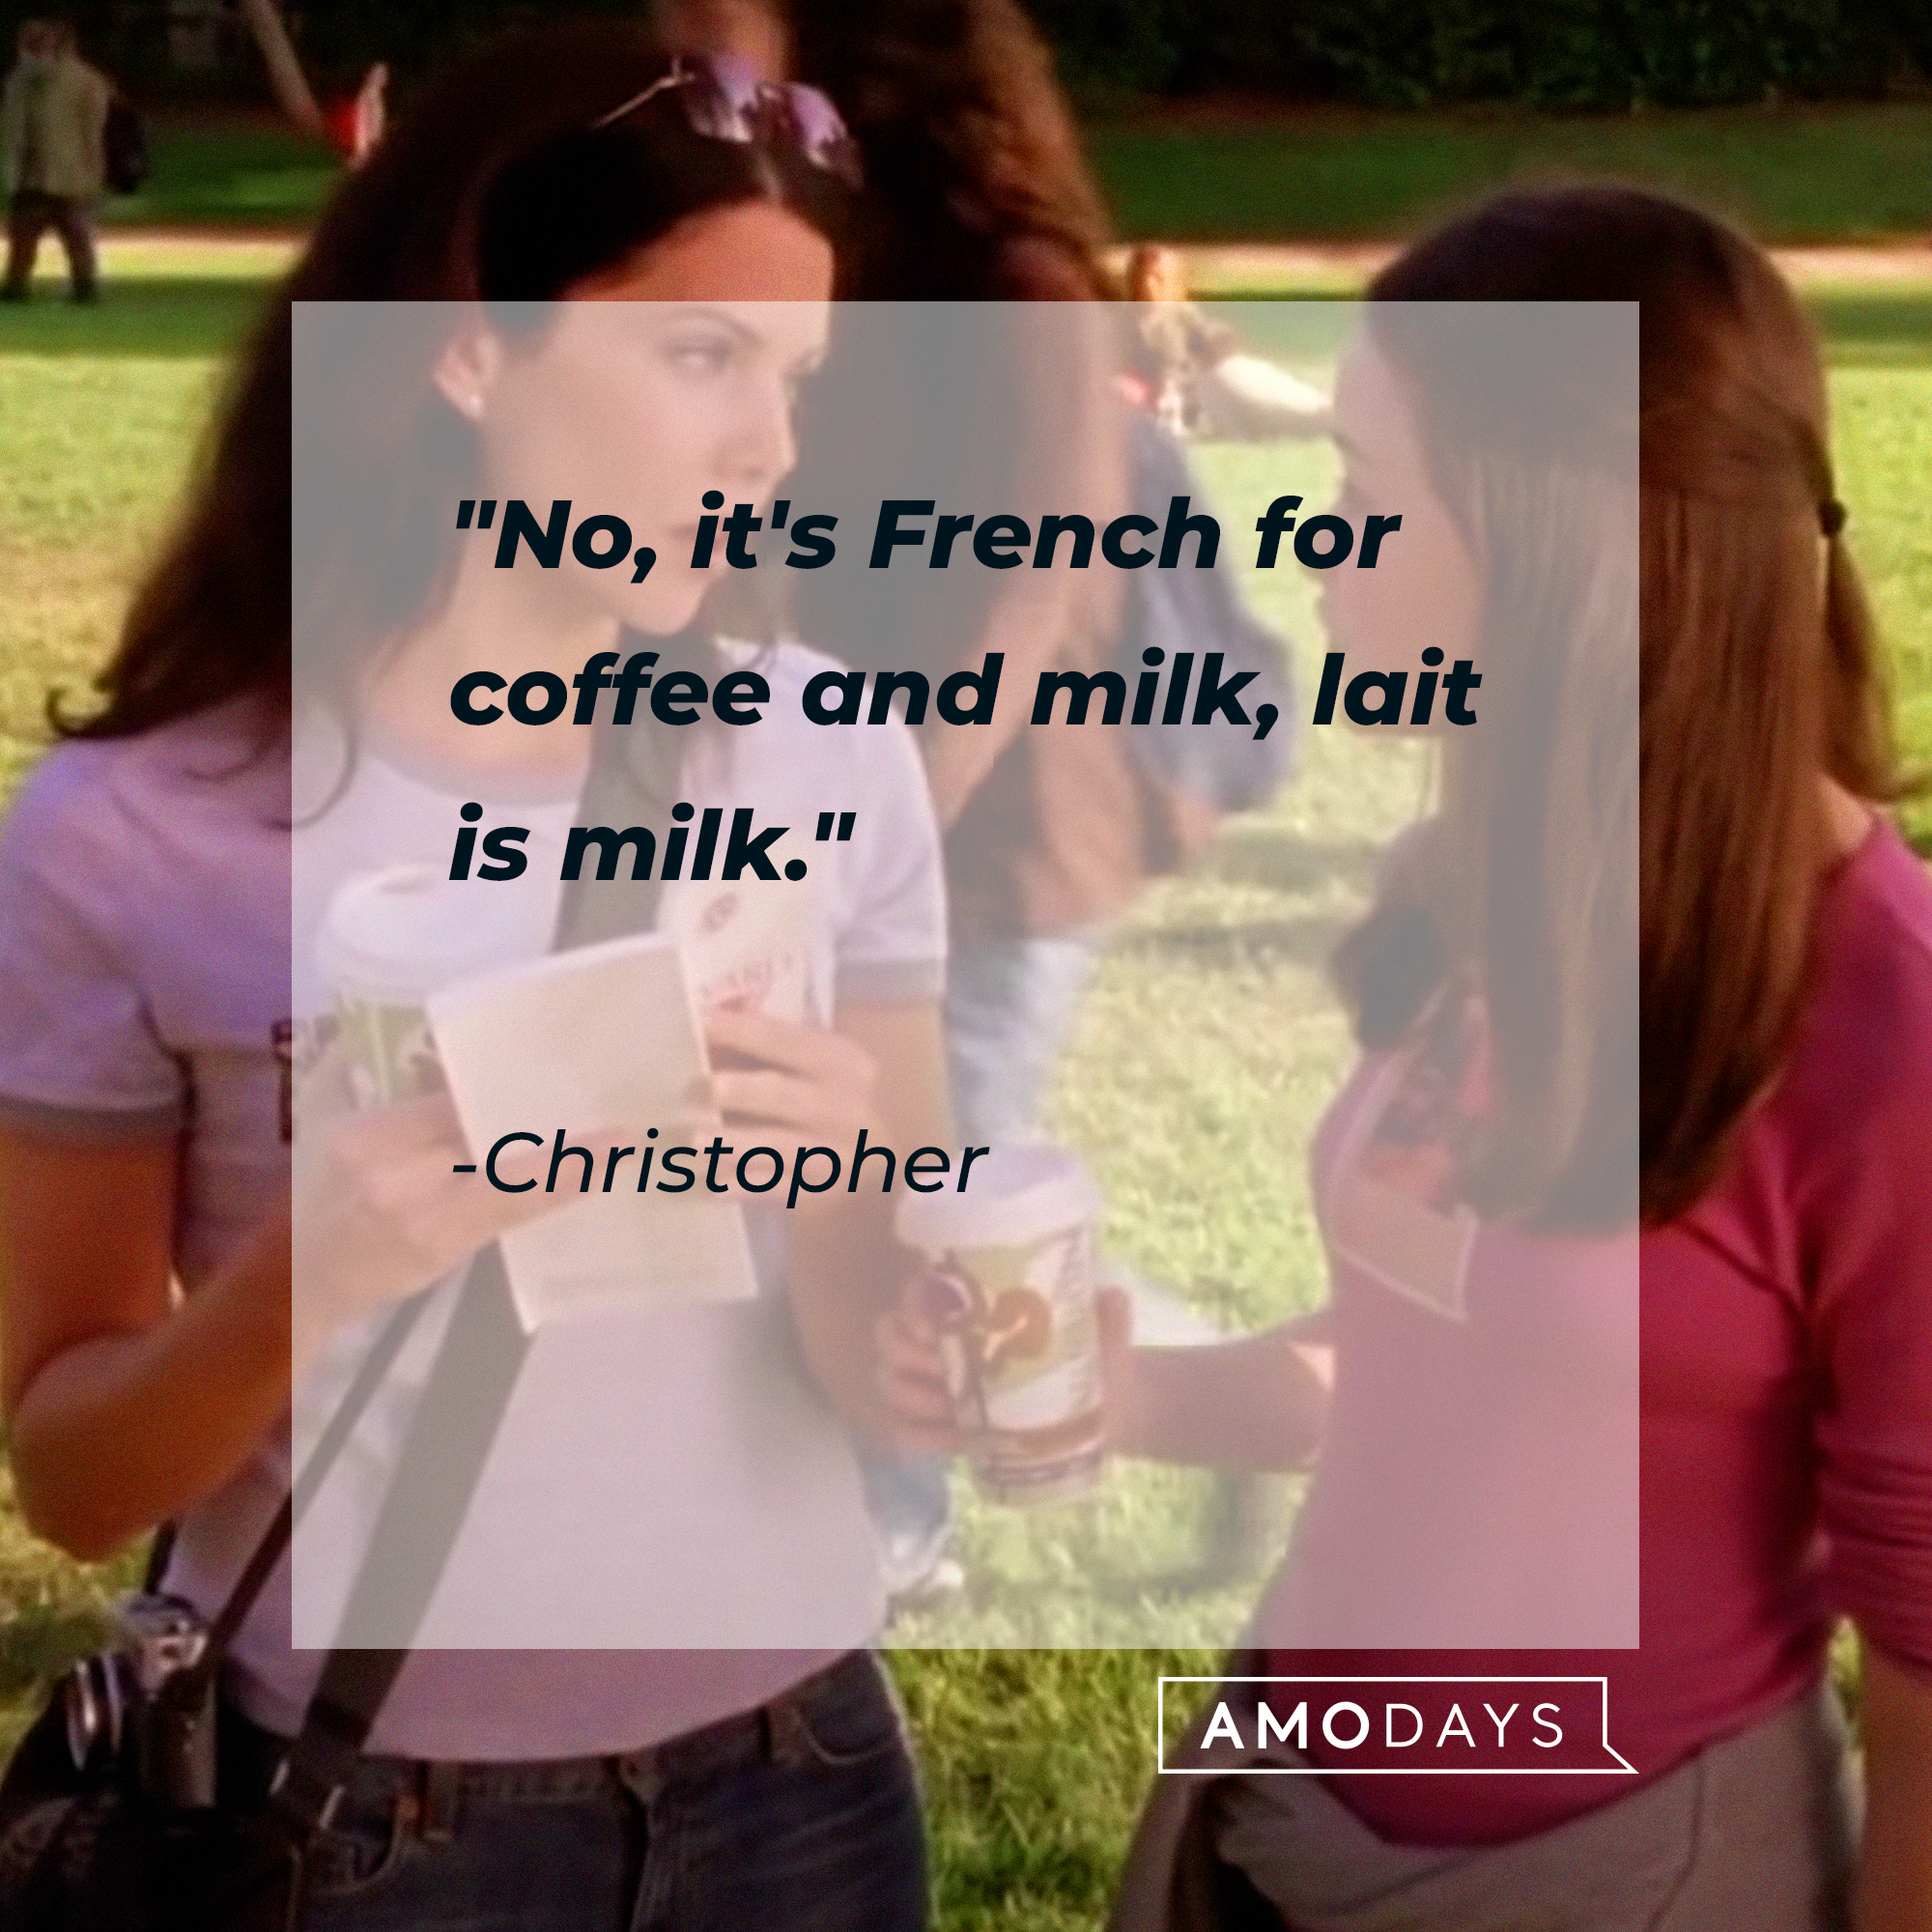 Christopher's quote: "No, it's French for coffee and milk, lait is milk." | Source: facebook.com/GilmoreGirls